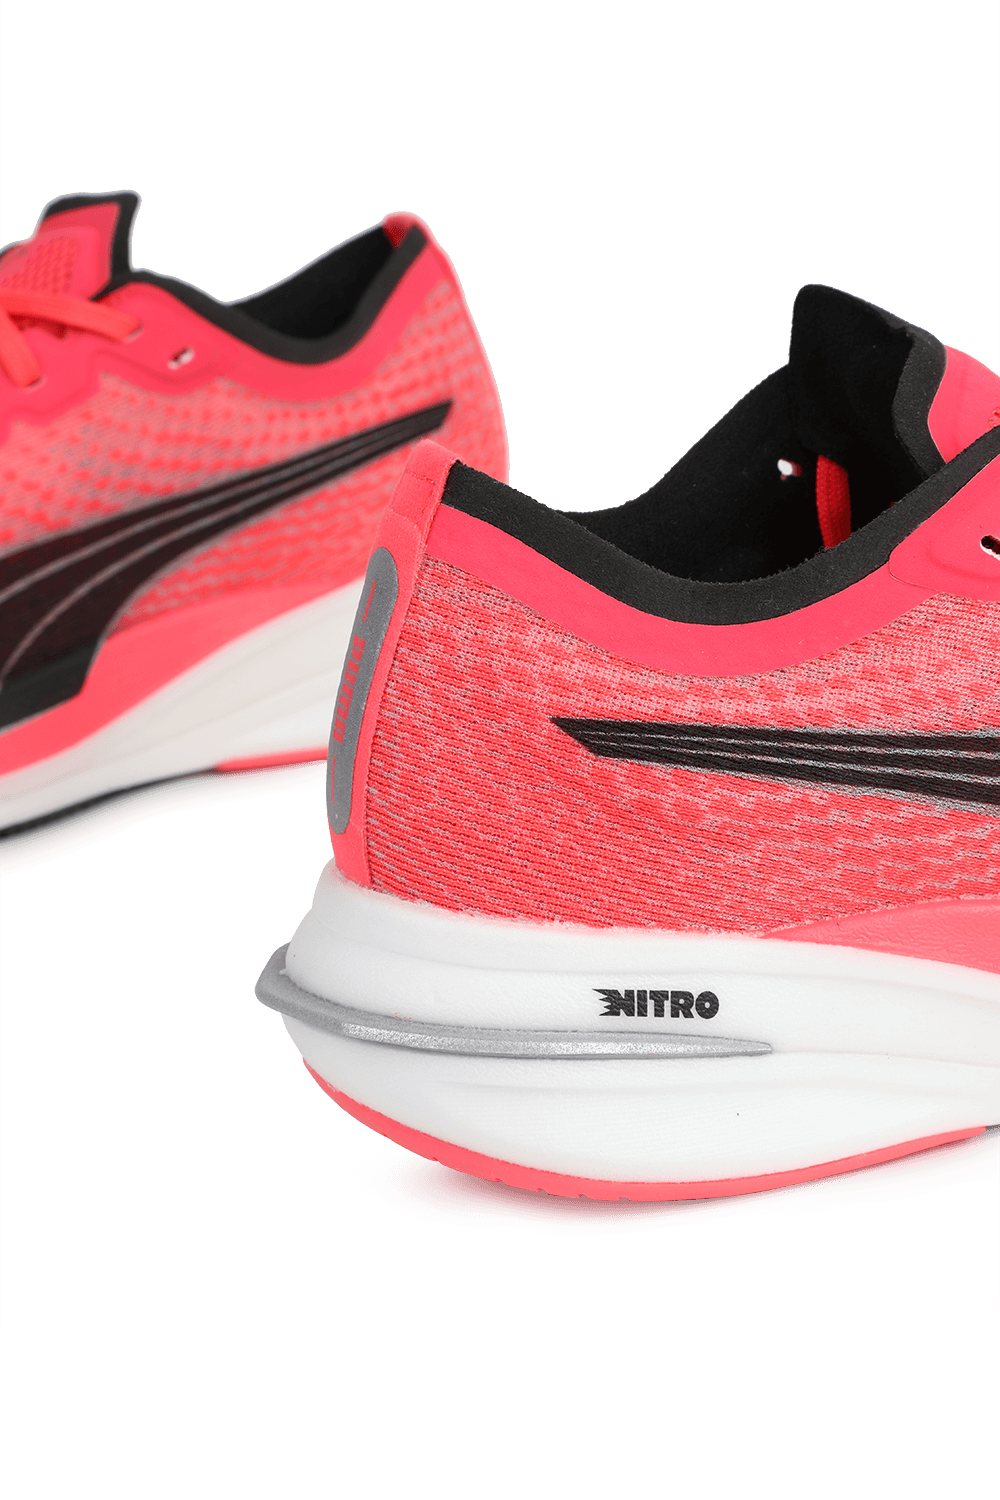 Deviate Nitro Running Shoes in Red and Black PUMA